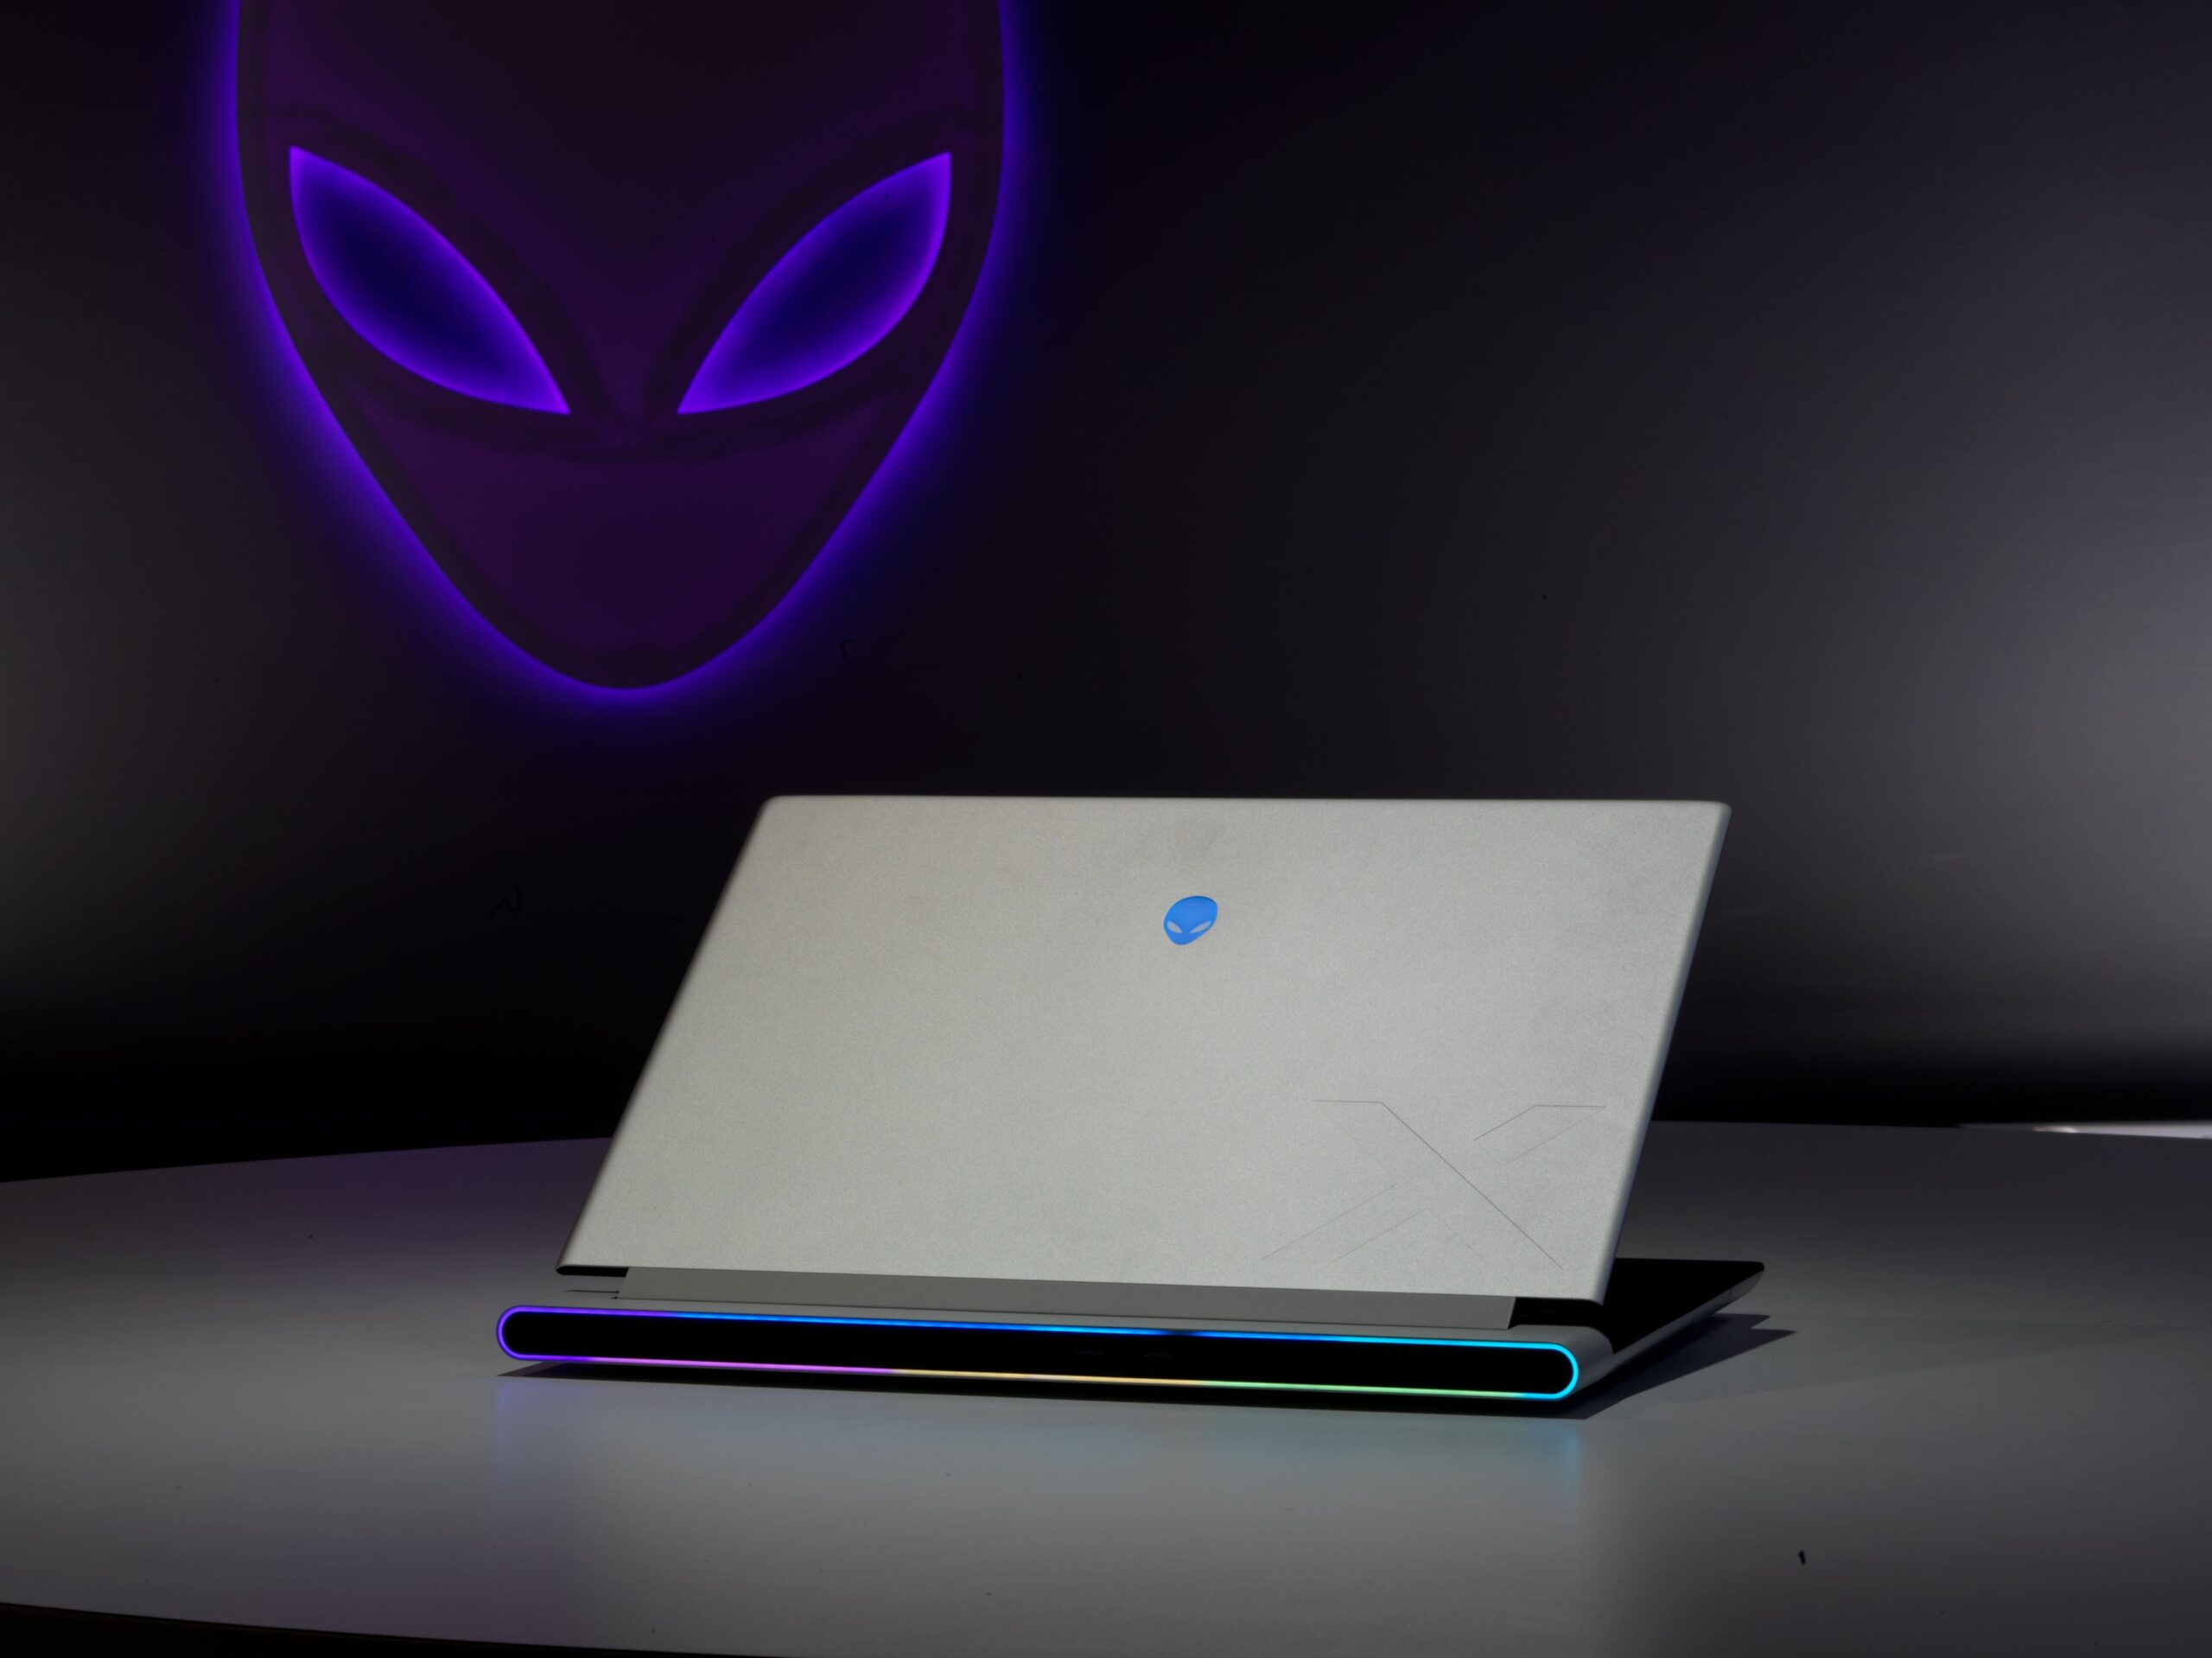 The Alienware M18 R2: A Powerful Gaming Laptop